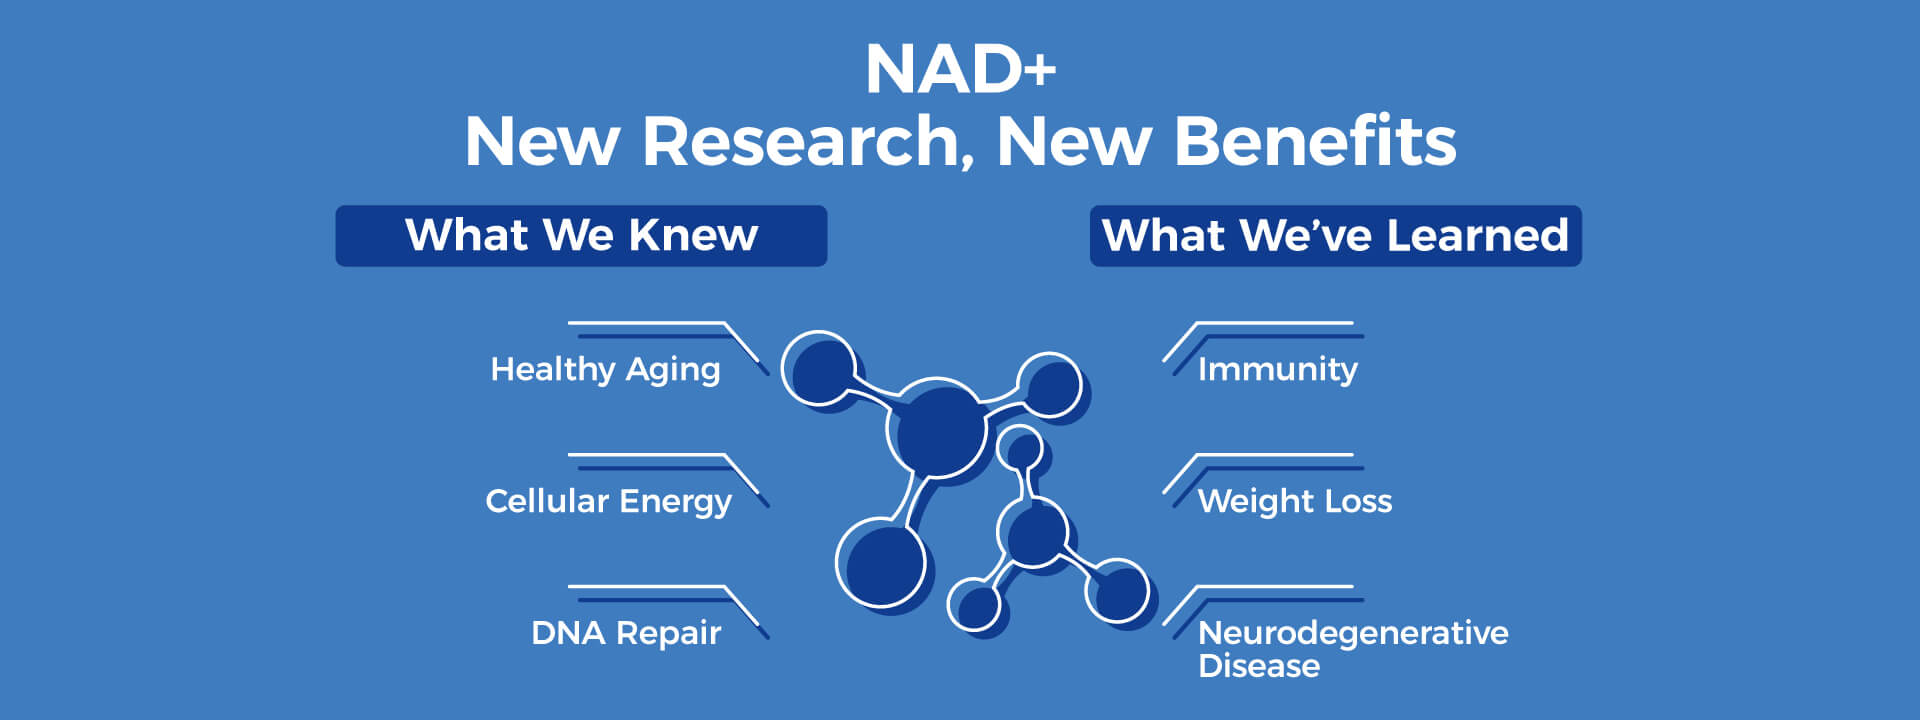 Latest Research on NAD+ Underscores its Broad Benefits